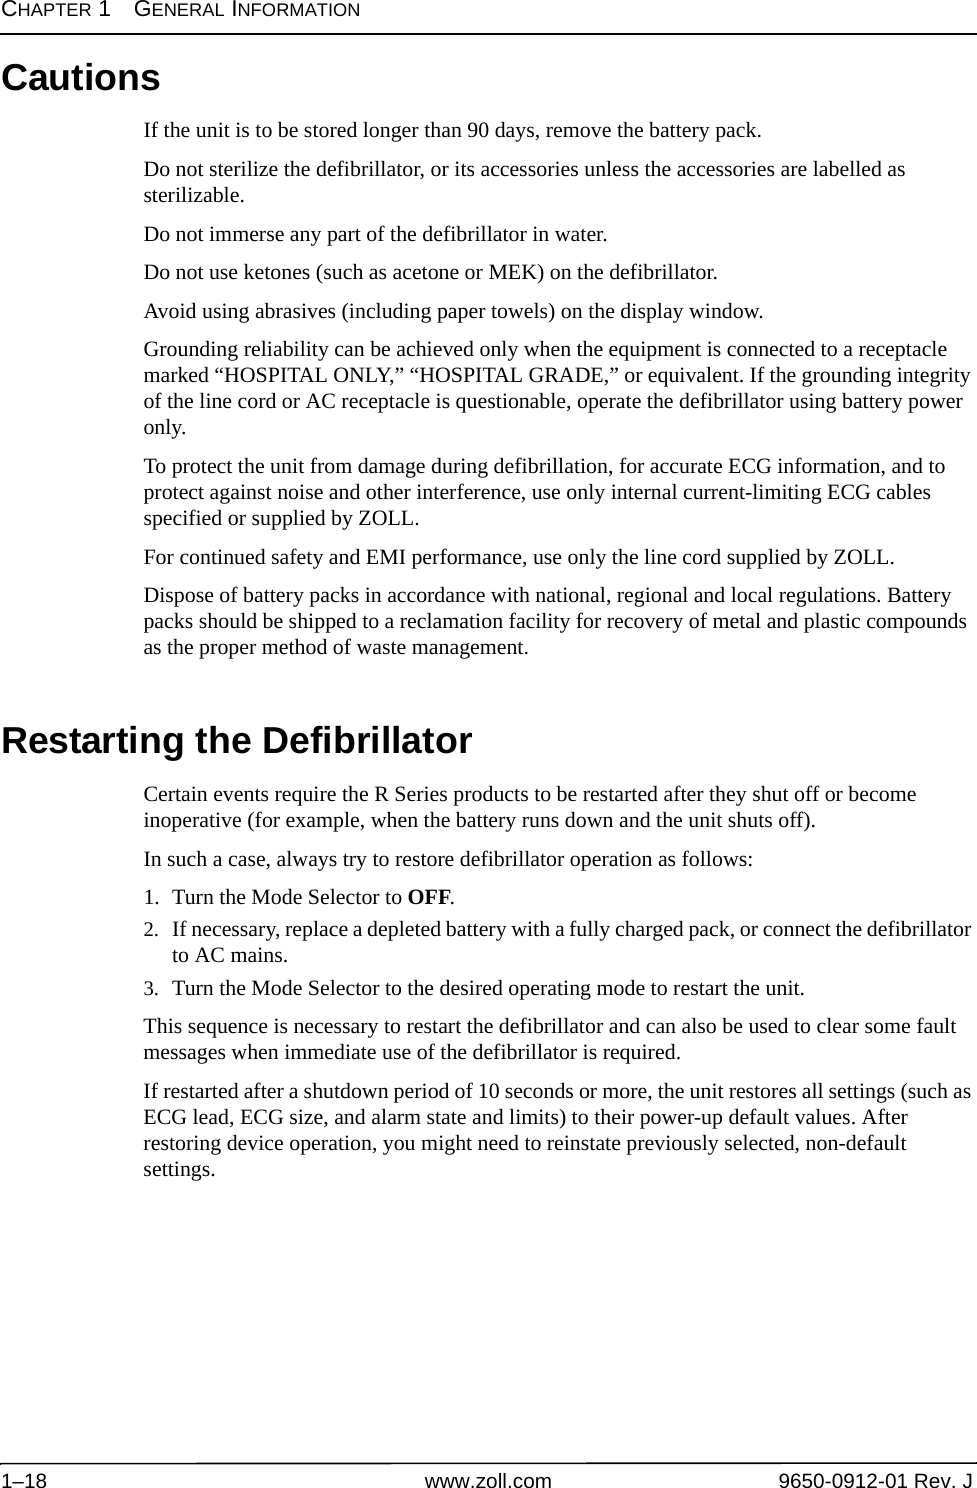 CHAPTER 1GENERAL INFORMATION1–18 www.zoll.com 9650-0912-01 Rev. JCautionsIf the unit is to be stored longer than 90 days, remove the battery pack.Do not sterilize the defibrillator, or its accessories unless the accessories are labelled as sterilizable.Do not immerse any part of the defibrillator in water.Do not use ketones (such as acetone or MEK) on the defibrillator.Avoid using abrasives (including paper towels) on the display window.Grounding reliability can be achieved only when the equipment is connected to a receptacle marked “HOSPITAL ONLY,” “HOSPITAL GRADE,” or equivalent. If the grounding integrity of the line cord or AC receptacle is questionable, operate the defibrillator using battery power only.To protect the unit from damage during defibrillation, for accurate ECG information, and to protect against noise and other interference, use only internal current-limiting ECG cables specified or supplied by ZOLL.For continued safety and EMI performance, use only the line cord supplied by ZOLL.Dispose of battery packs in accordance with national, regional and local regulations. Battery packs should be shipped to a reclamation facility for recovery of metal and plastic compounds as the proper method of waste management.Restarting the DefibrillatorCertain events require the R Series products to be restarted after they shut off or become inoperative (for example, when the battery runs down and the unit shuts off).In such a case, always try to restore defibrillator operation as follows:1. Turn the Mode Selector to OFF.2. If necessary, replace a depleted battery with a fully charged pack, or connect the defibrillator to AC mains.3. Turn the Mode Selector to the desired operating mode to restart the unit.This sequence is necessary to restart the defibrillator and can also be used to clear some fault messages when immediate use of the defibrillator is required.If restarted after a shutdown period of 10 seconds or more, the unit restores all settings (such as ECG lead, ECG size, and alarm state and limits) to their power-up default values. After restoring device operation, you might need to reinstate previously selected, non-default settings.